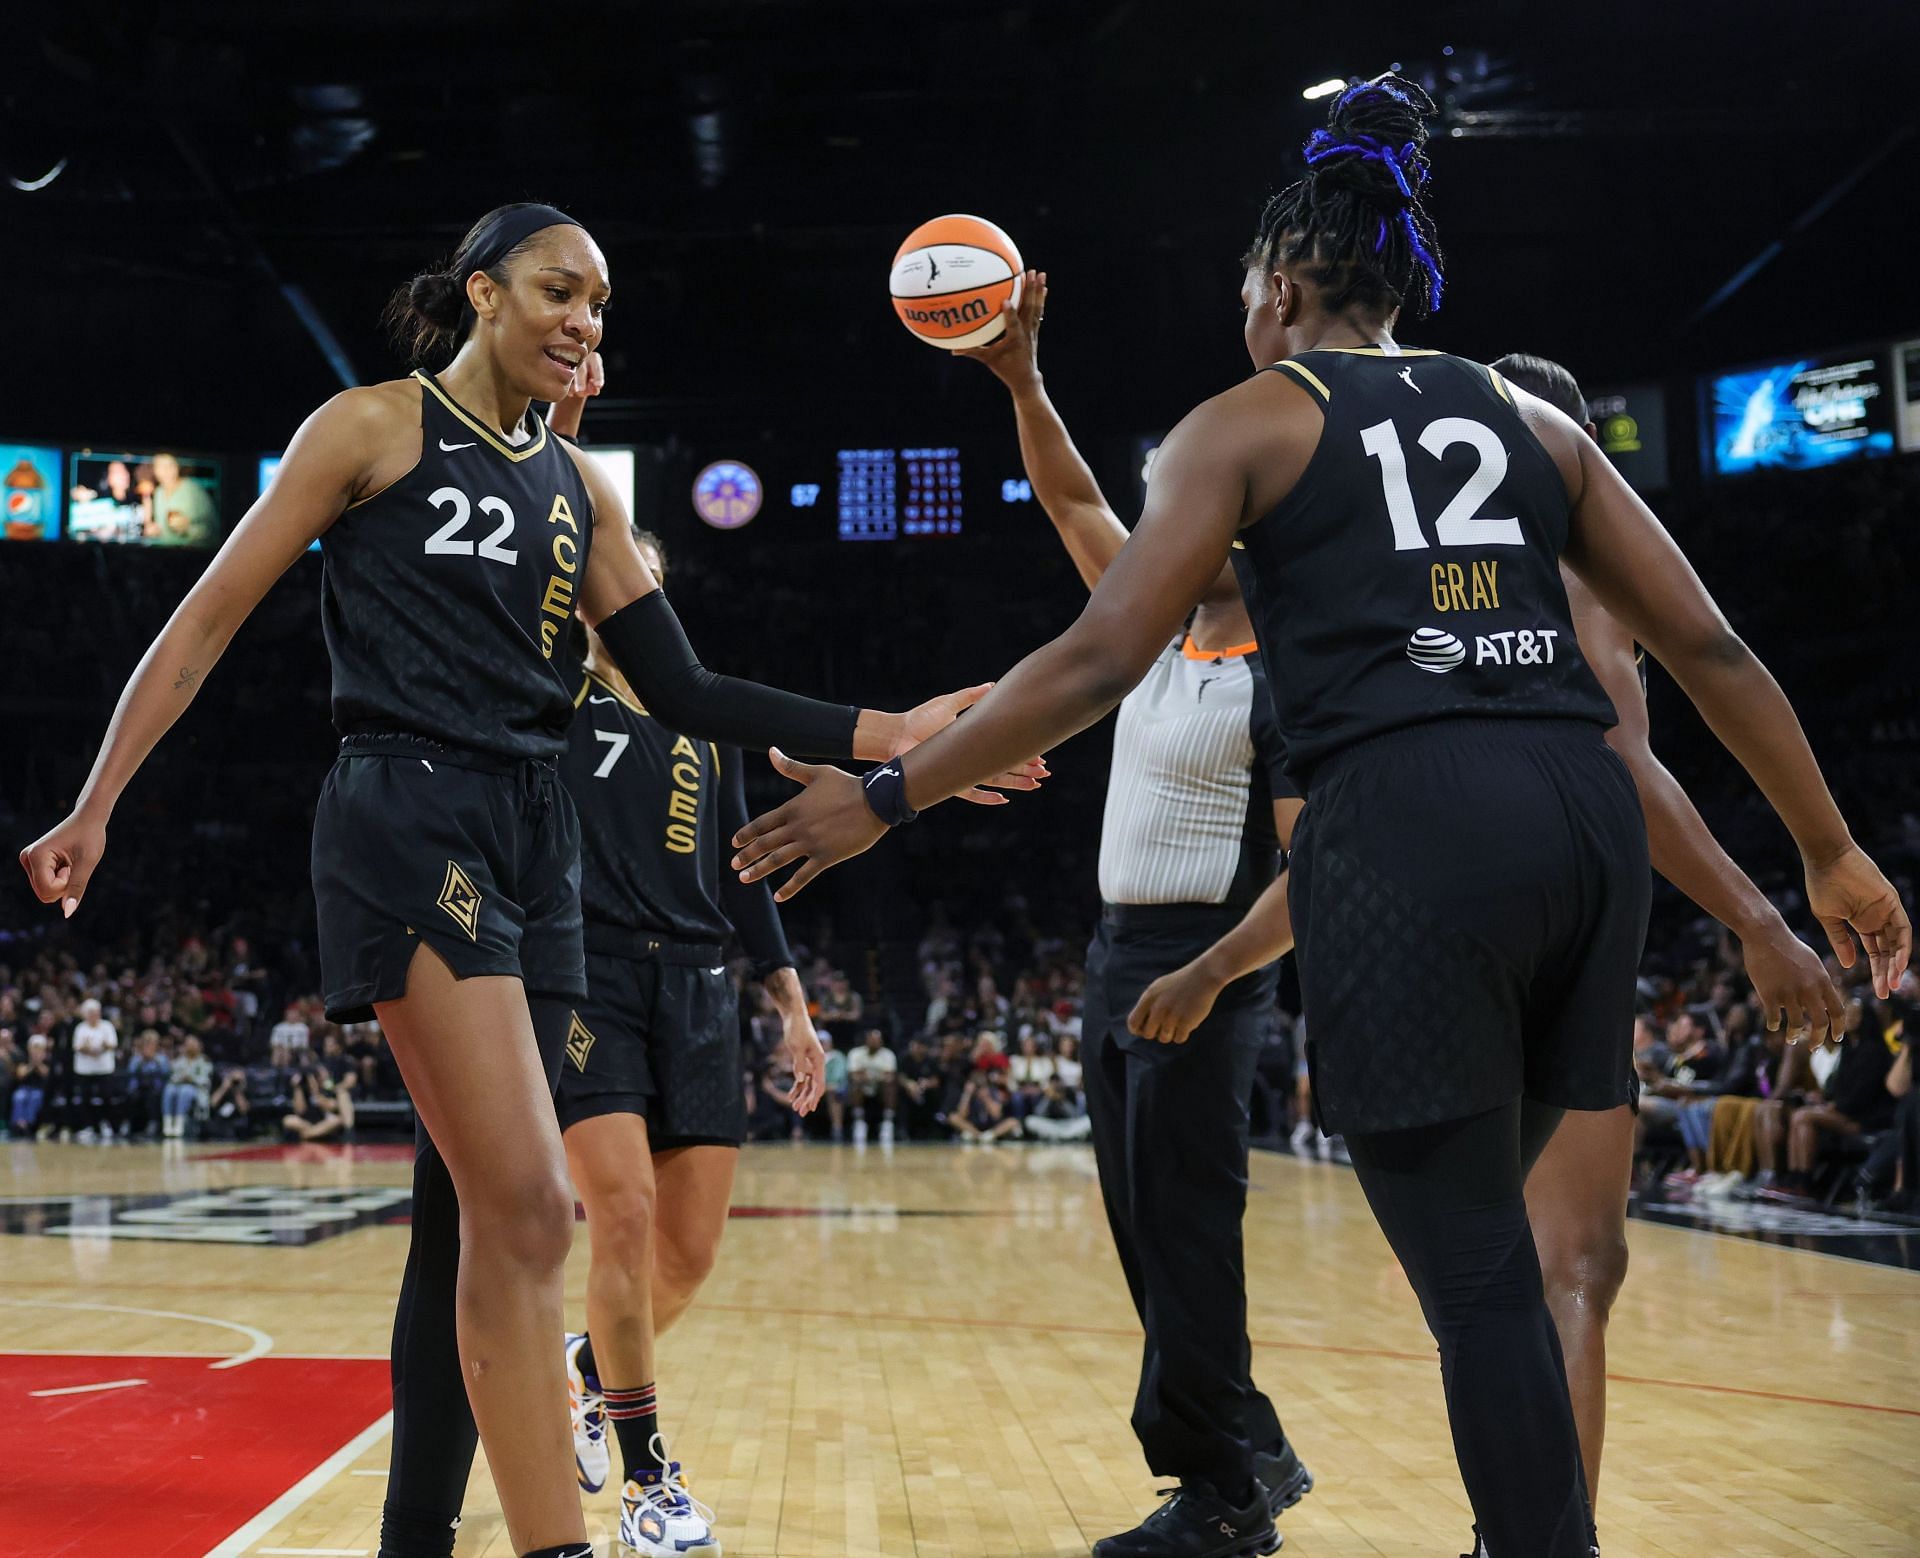 How much revenue does WNBA generate? Exploring the financial potential